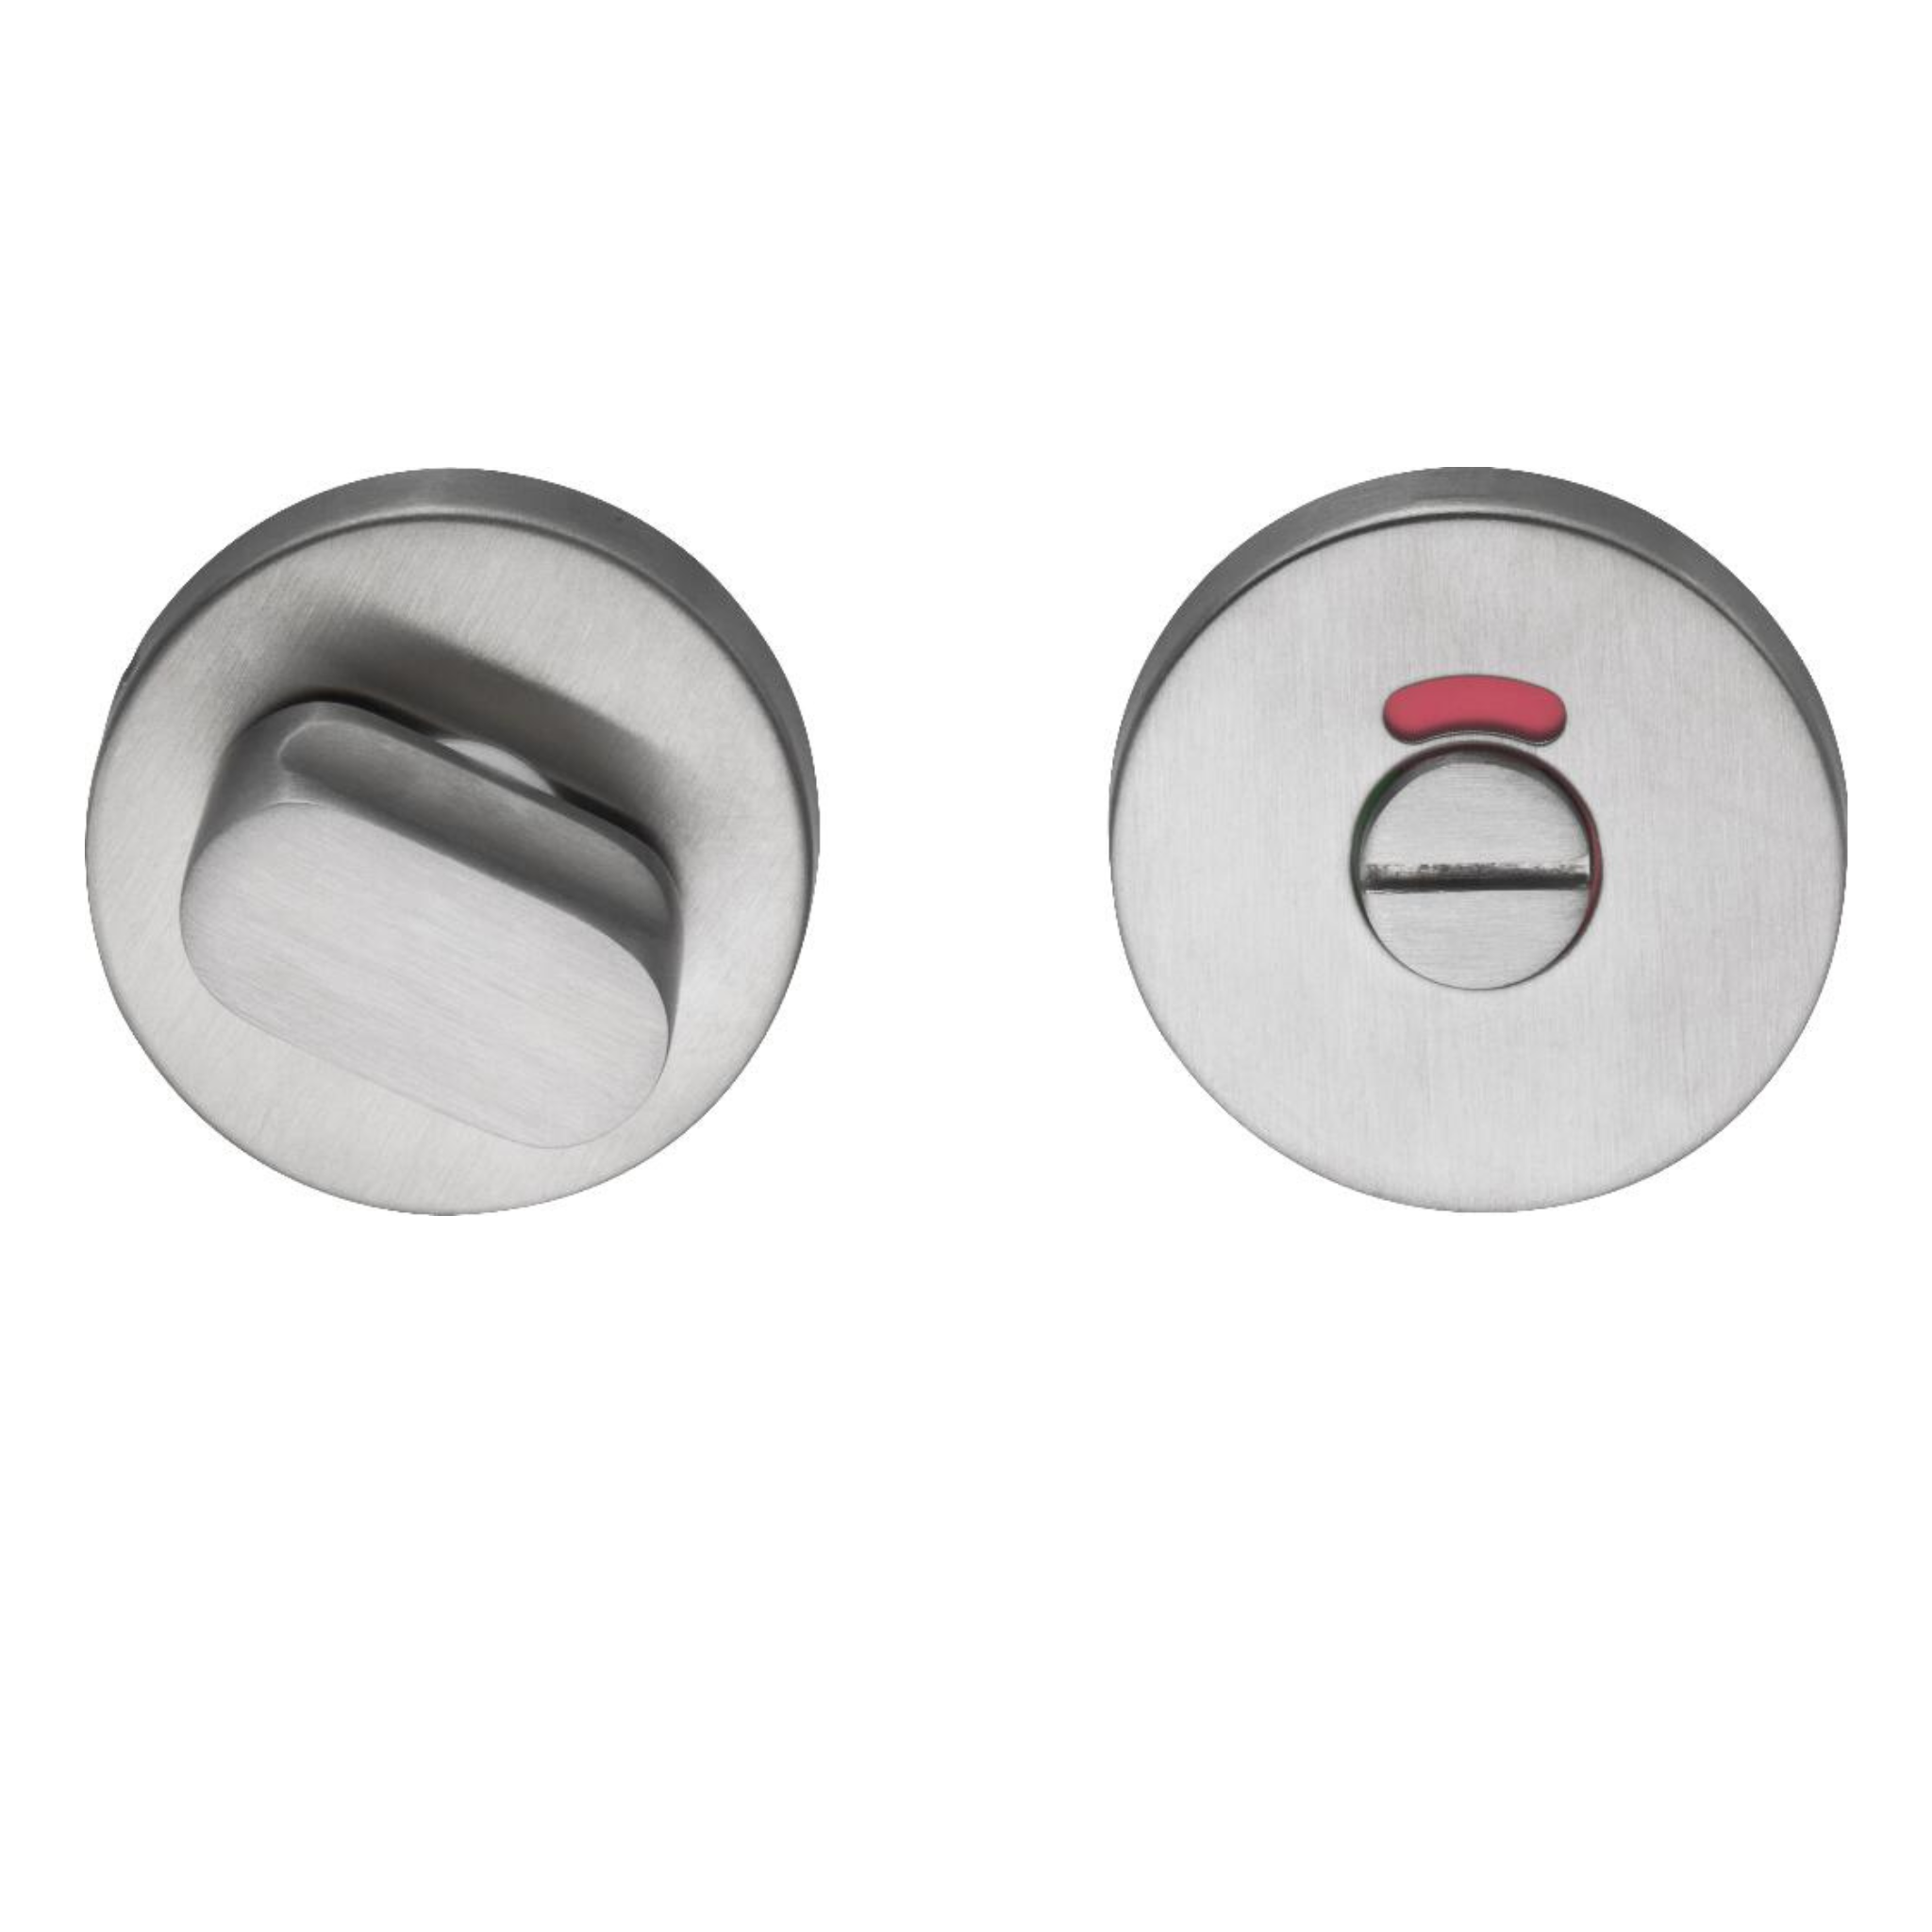 FWC.101.RL.SS, WC Escutcheon, Round Rose, 53mm (h) x 53mm (w) x 8mm (t), Stainless Steel, CISA